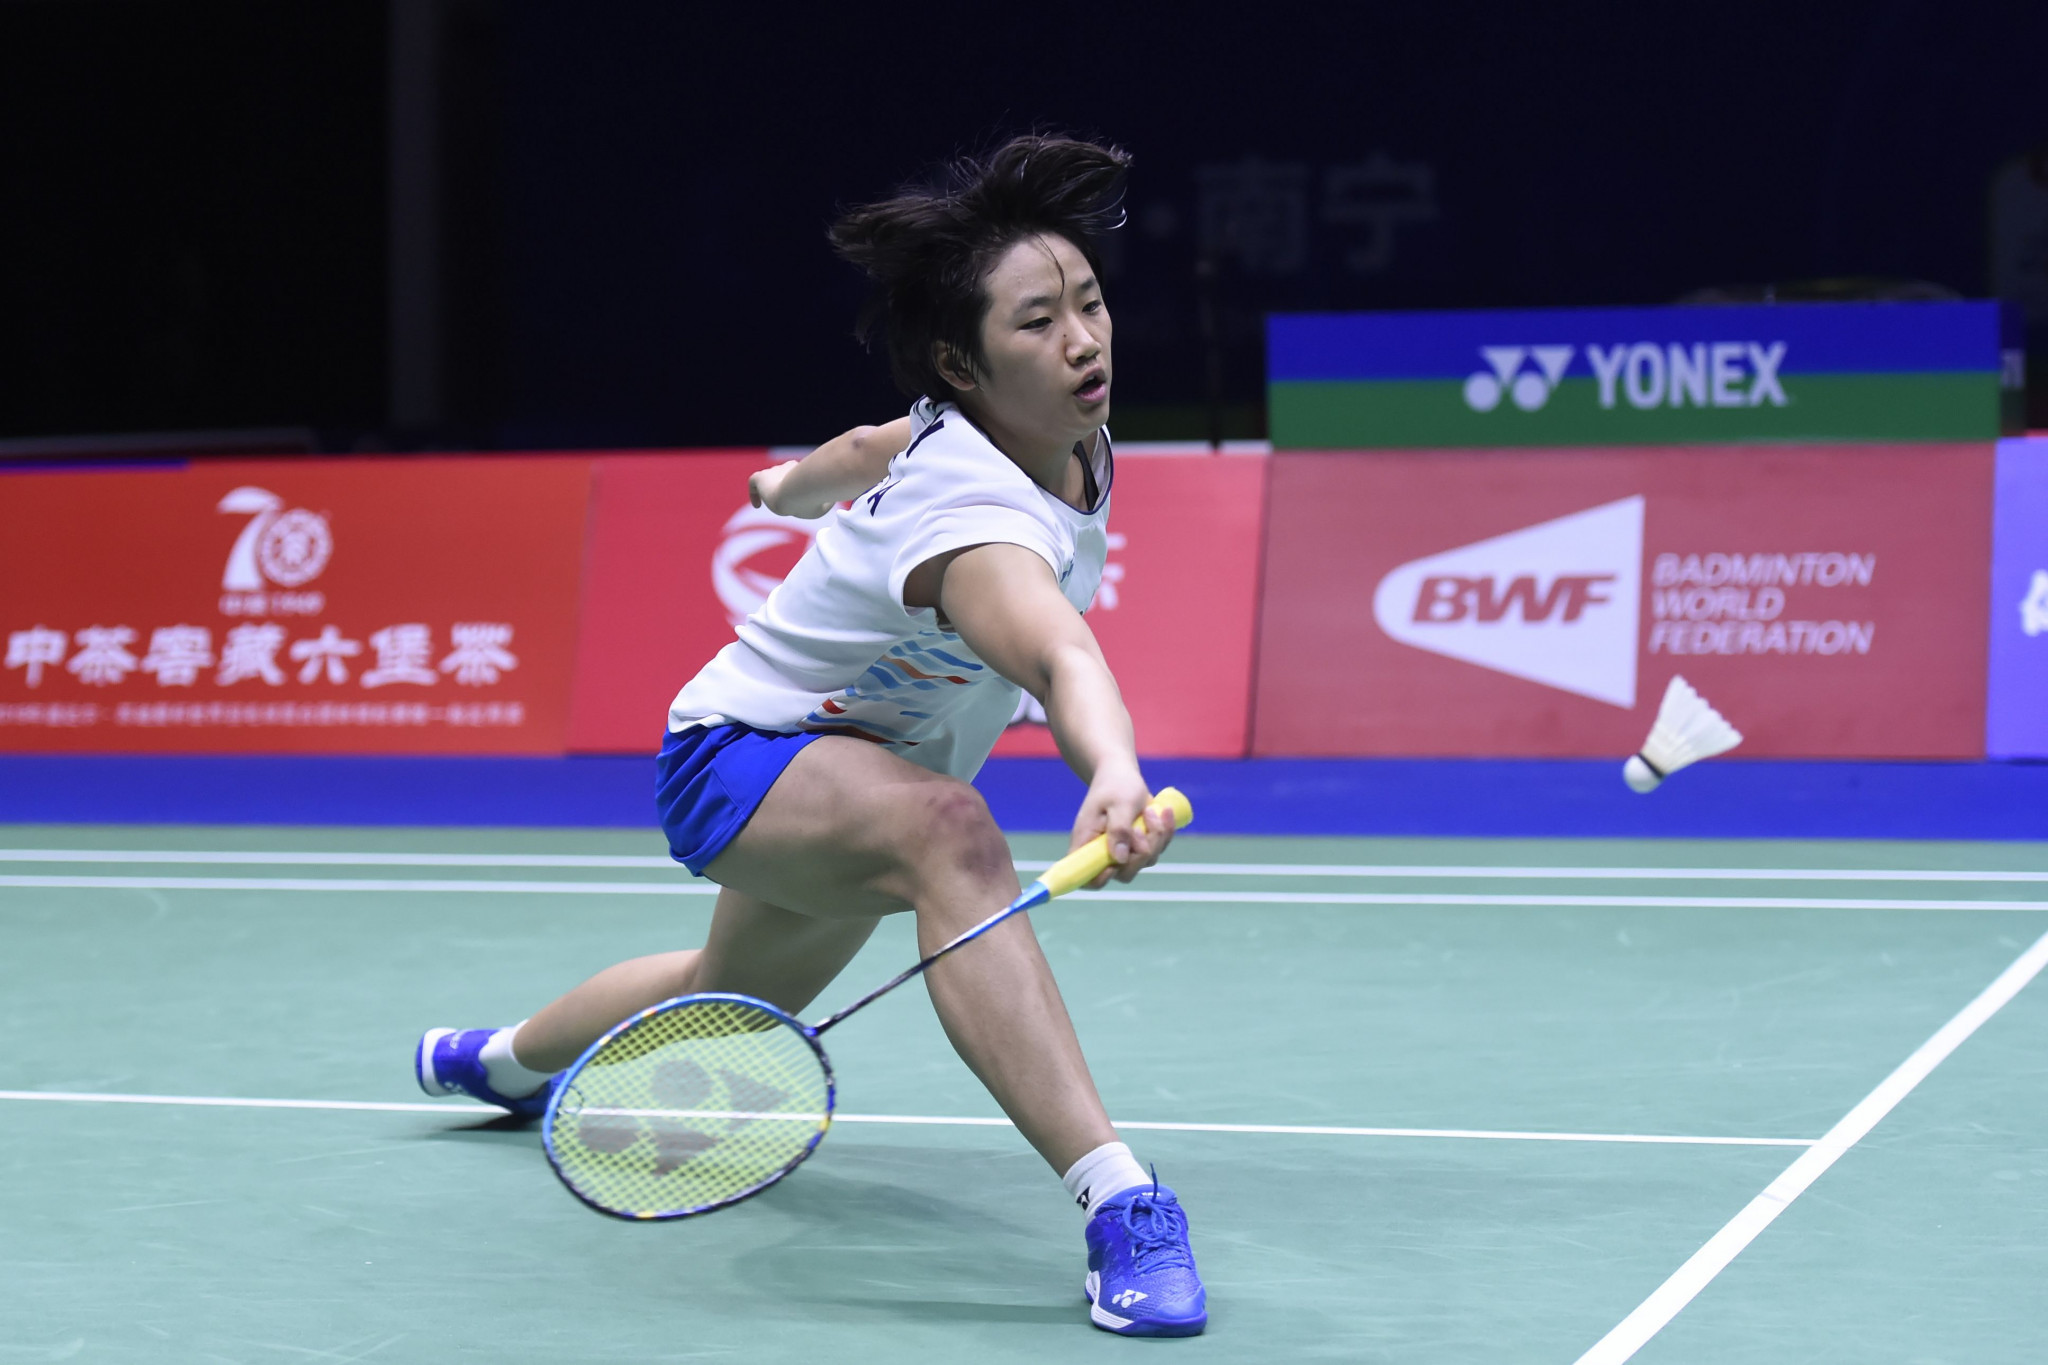 Teenage star An beats Olympic champion Marín to clinch BWF French Open